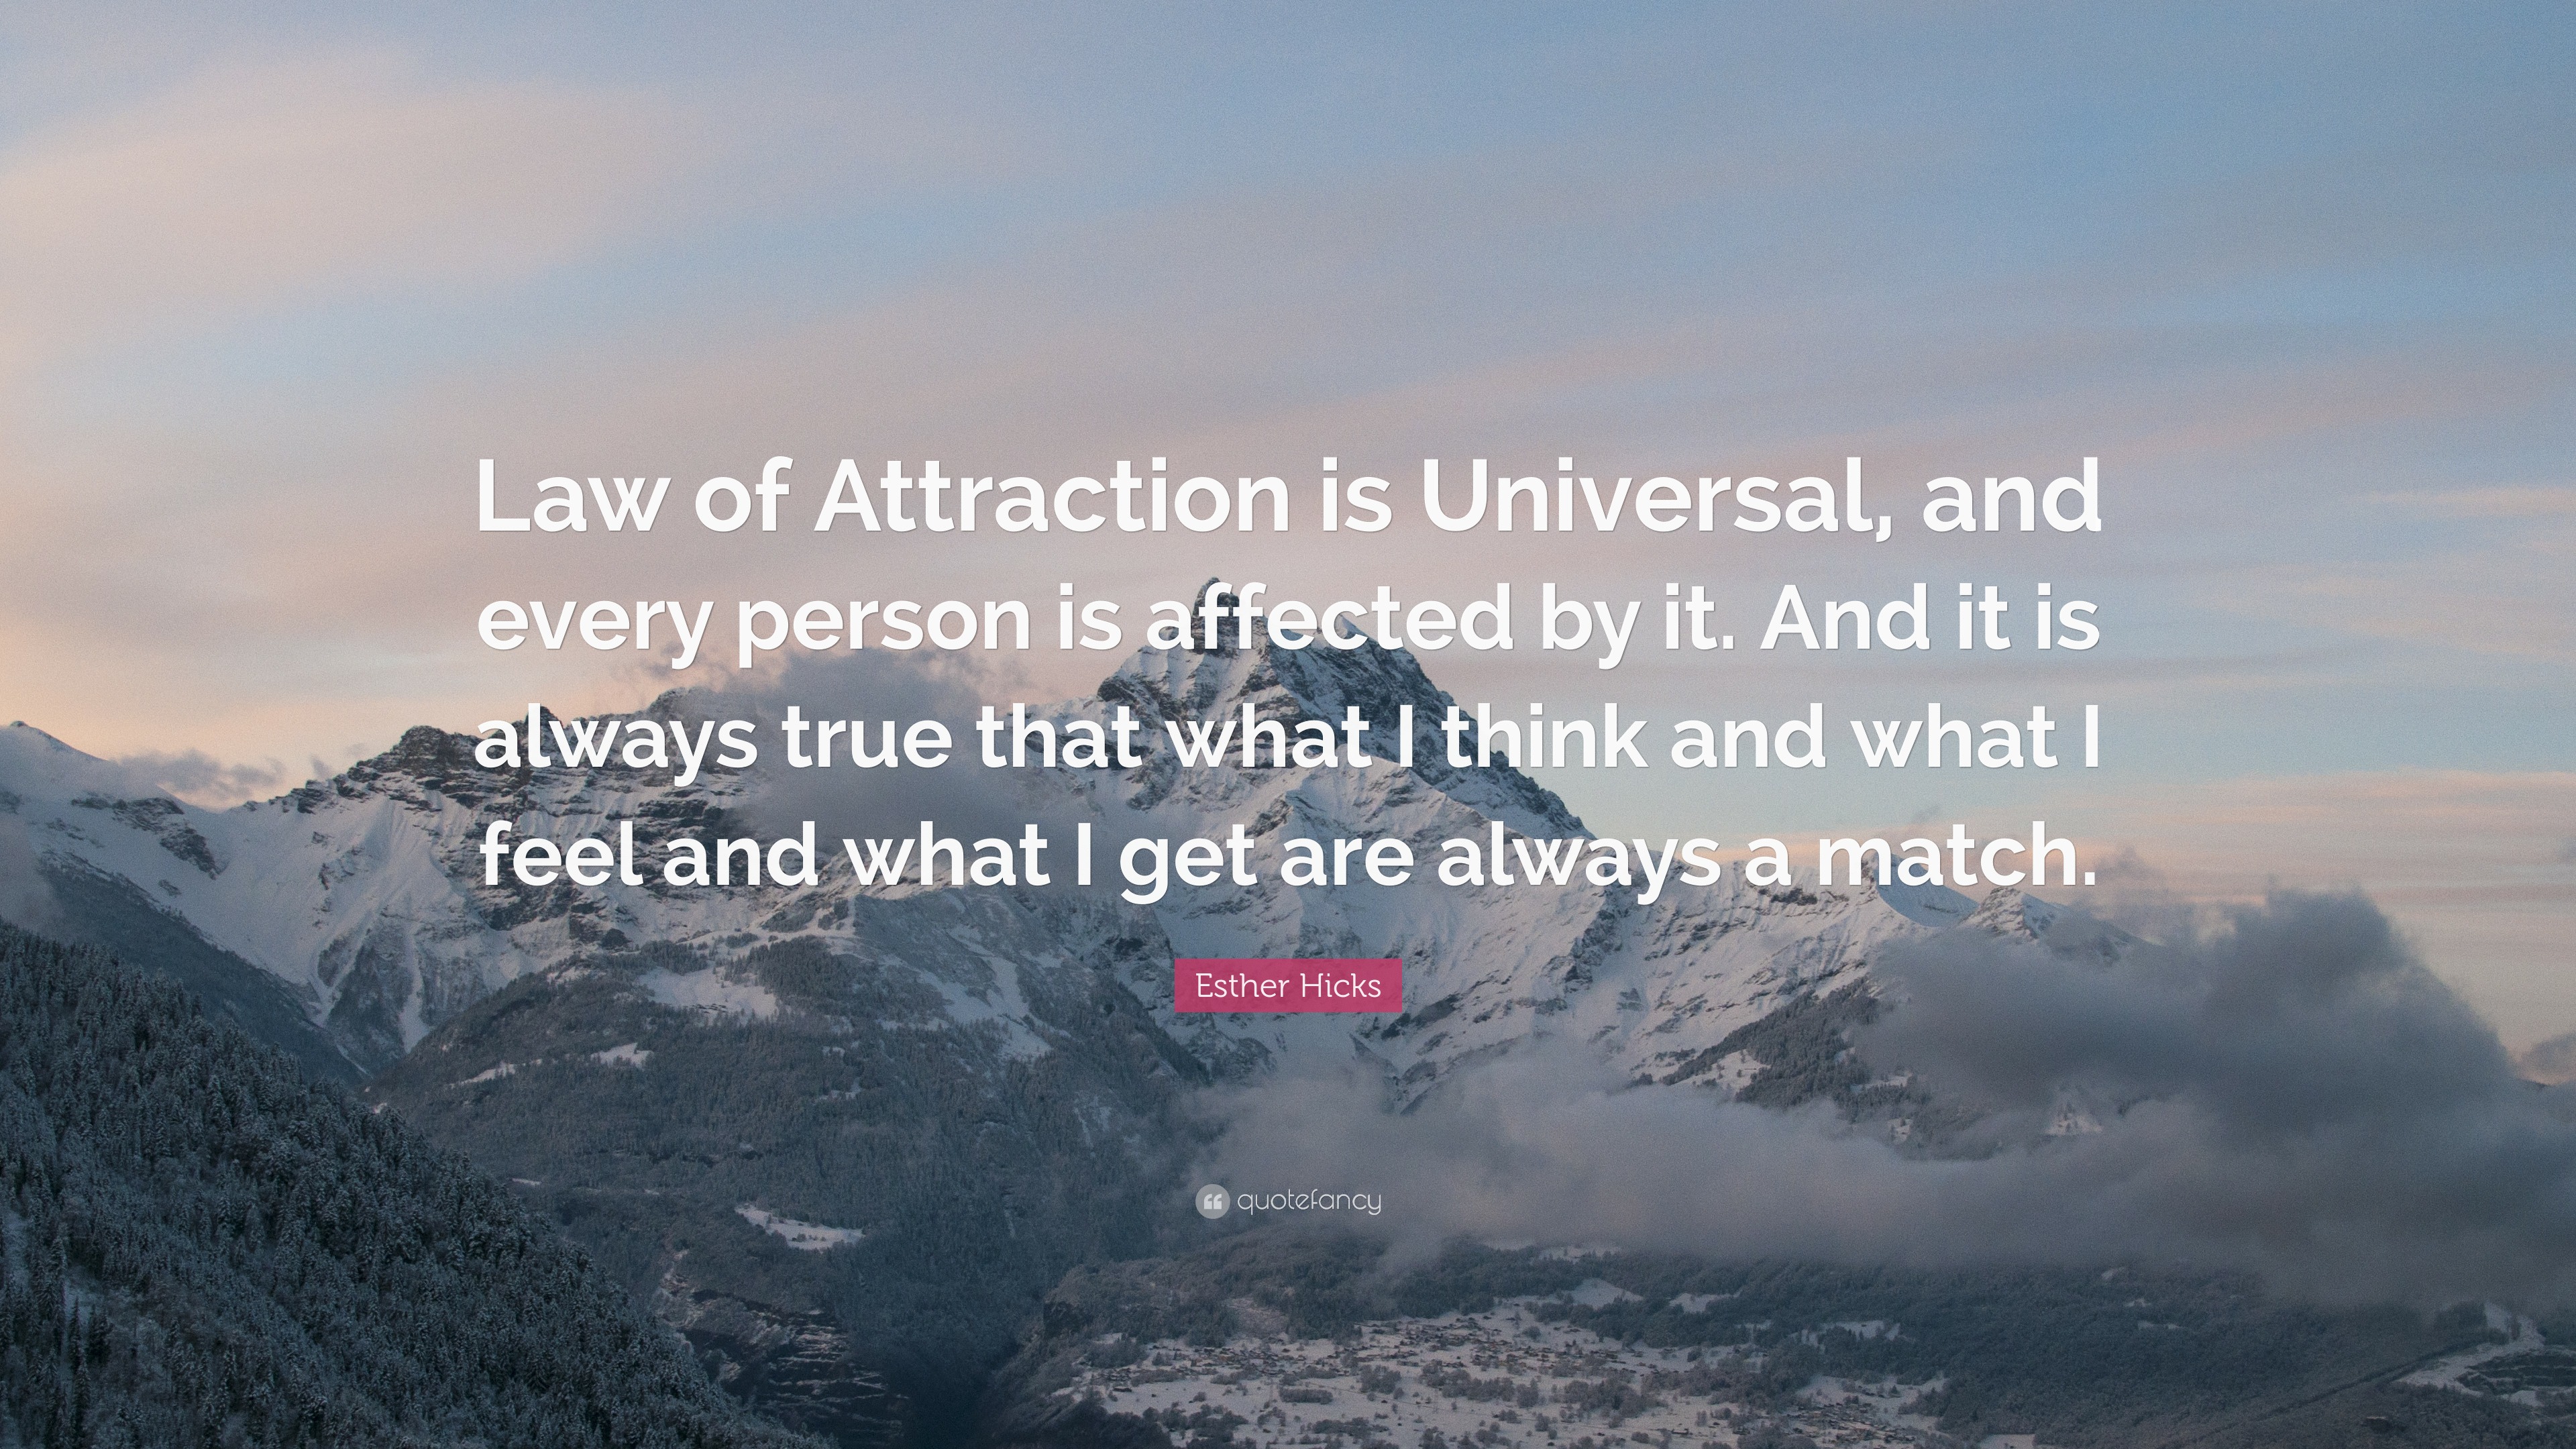 Esther Hicks Quote: “Law of Attraction is Universal, and every person ...